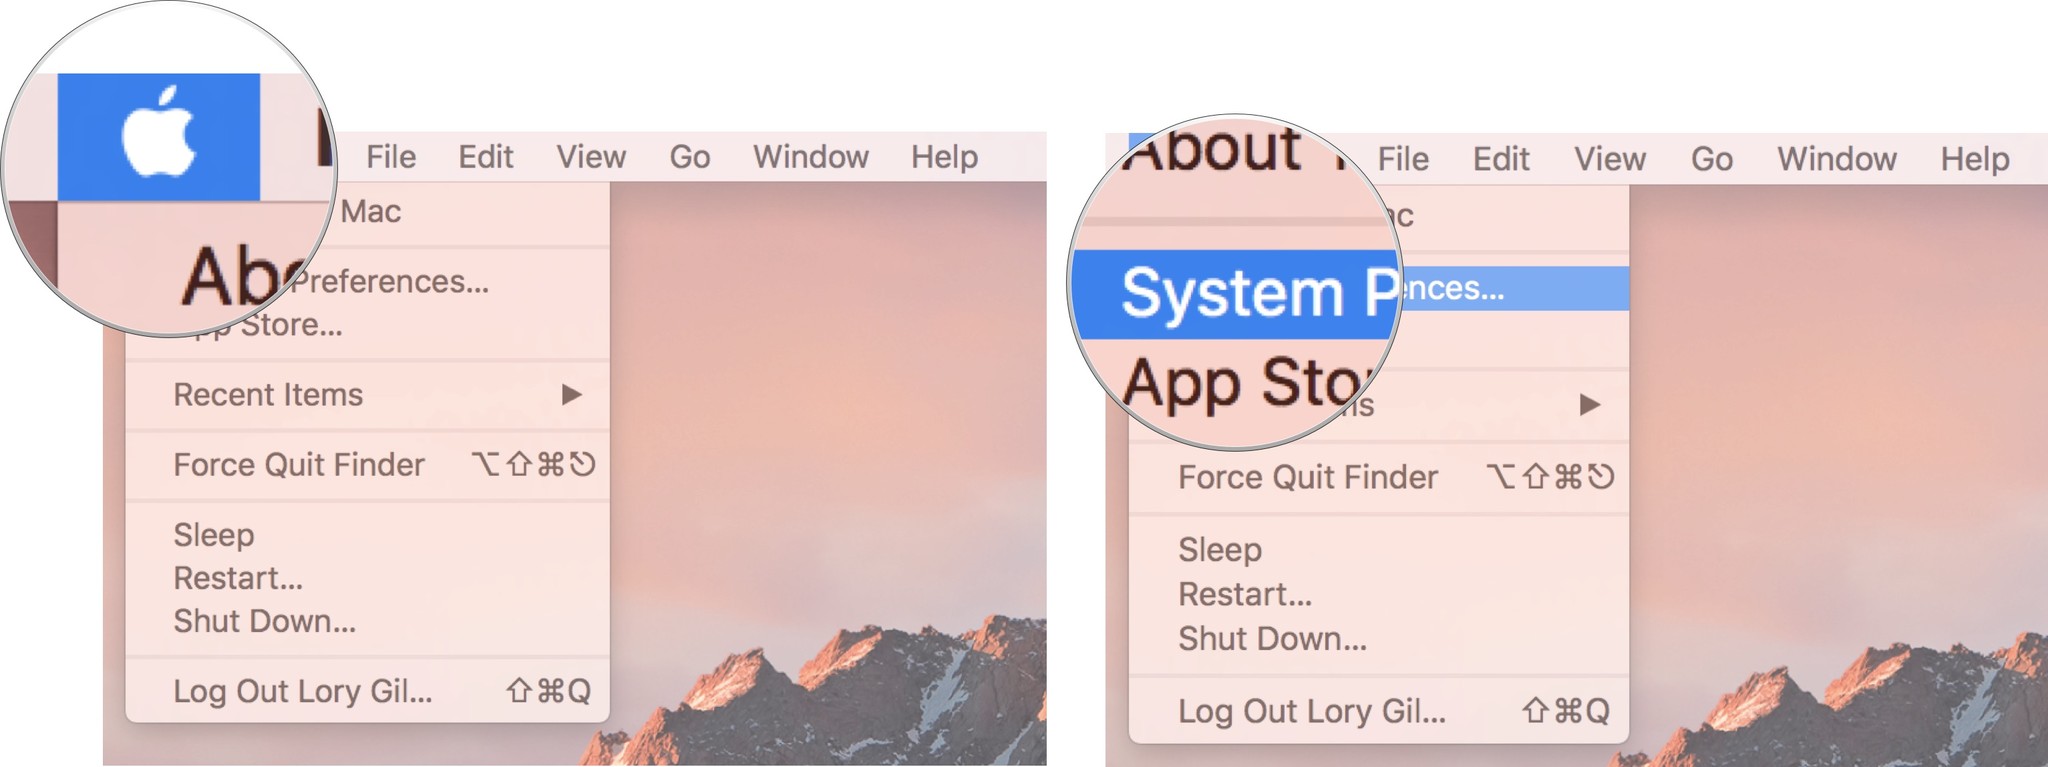 Click on the Apple menu logo, then click on System Preferences